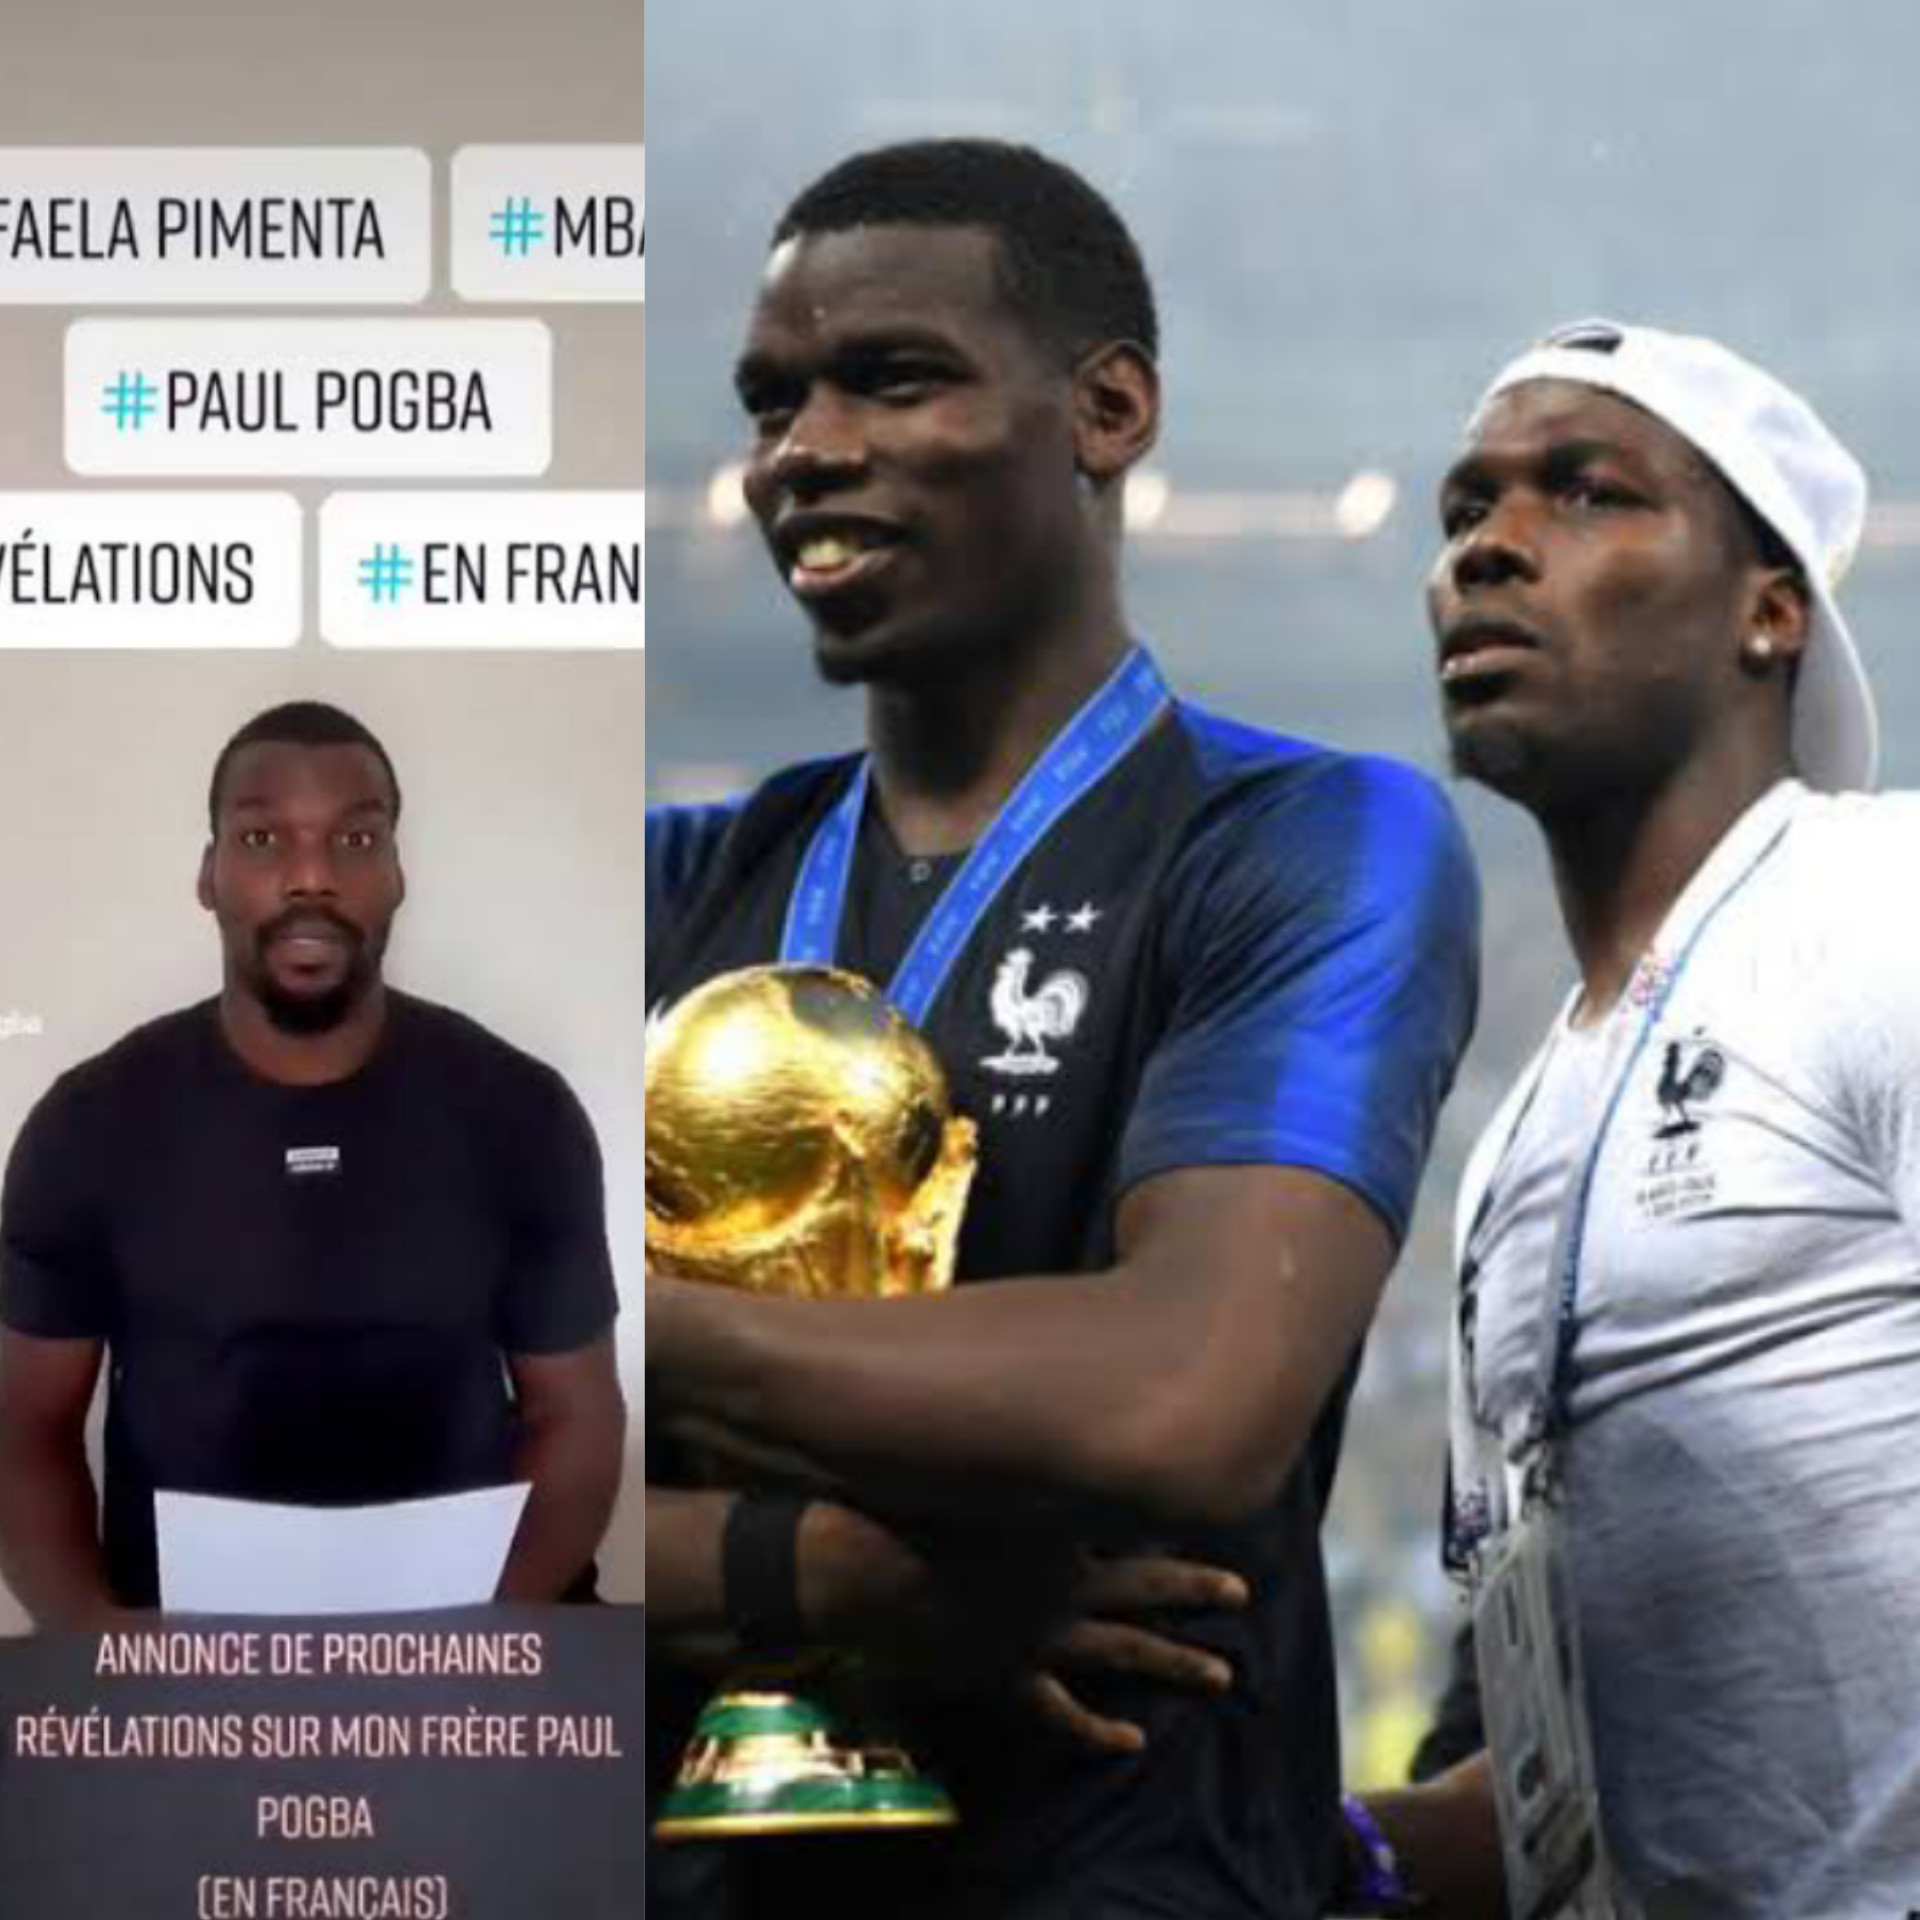 'The public need to know certain things' - Paul Pogba's elder brother threatens to share explosive revelations about the french footballer (video)